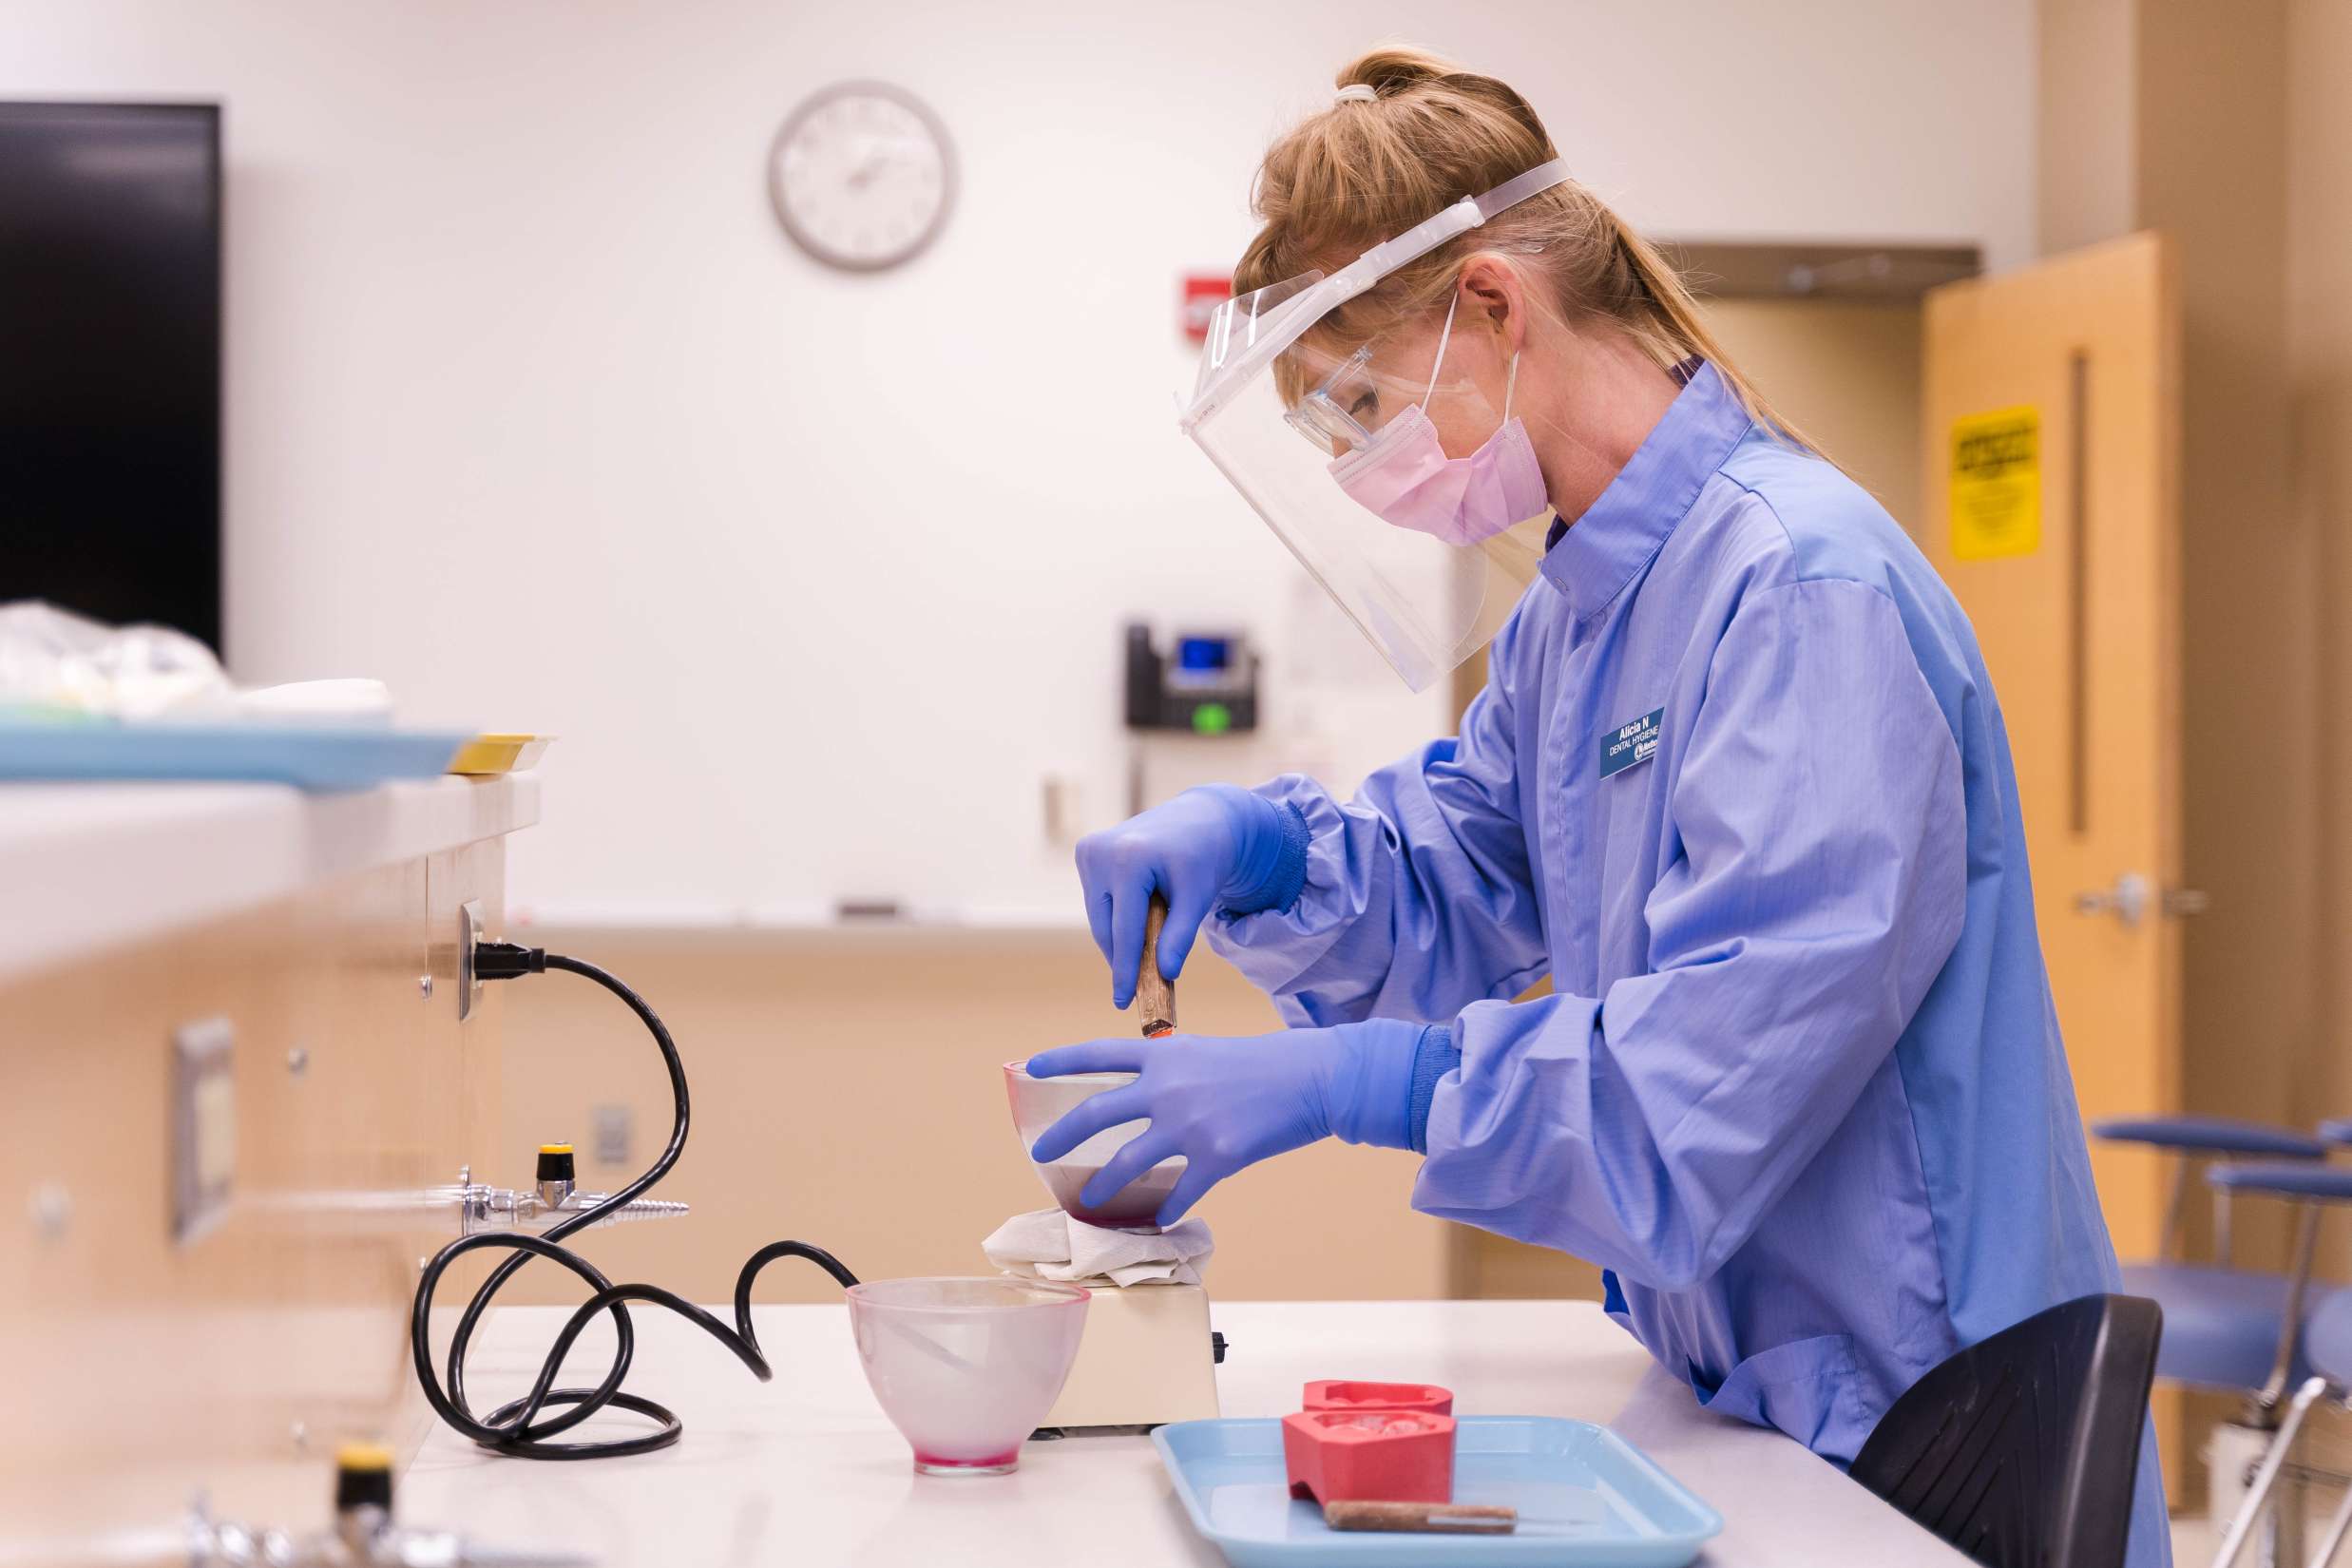 A dental hygienist wearing blue medical garbs and gloves working with dental molds inside of a lab.